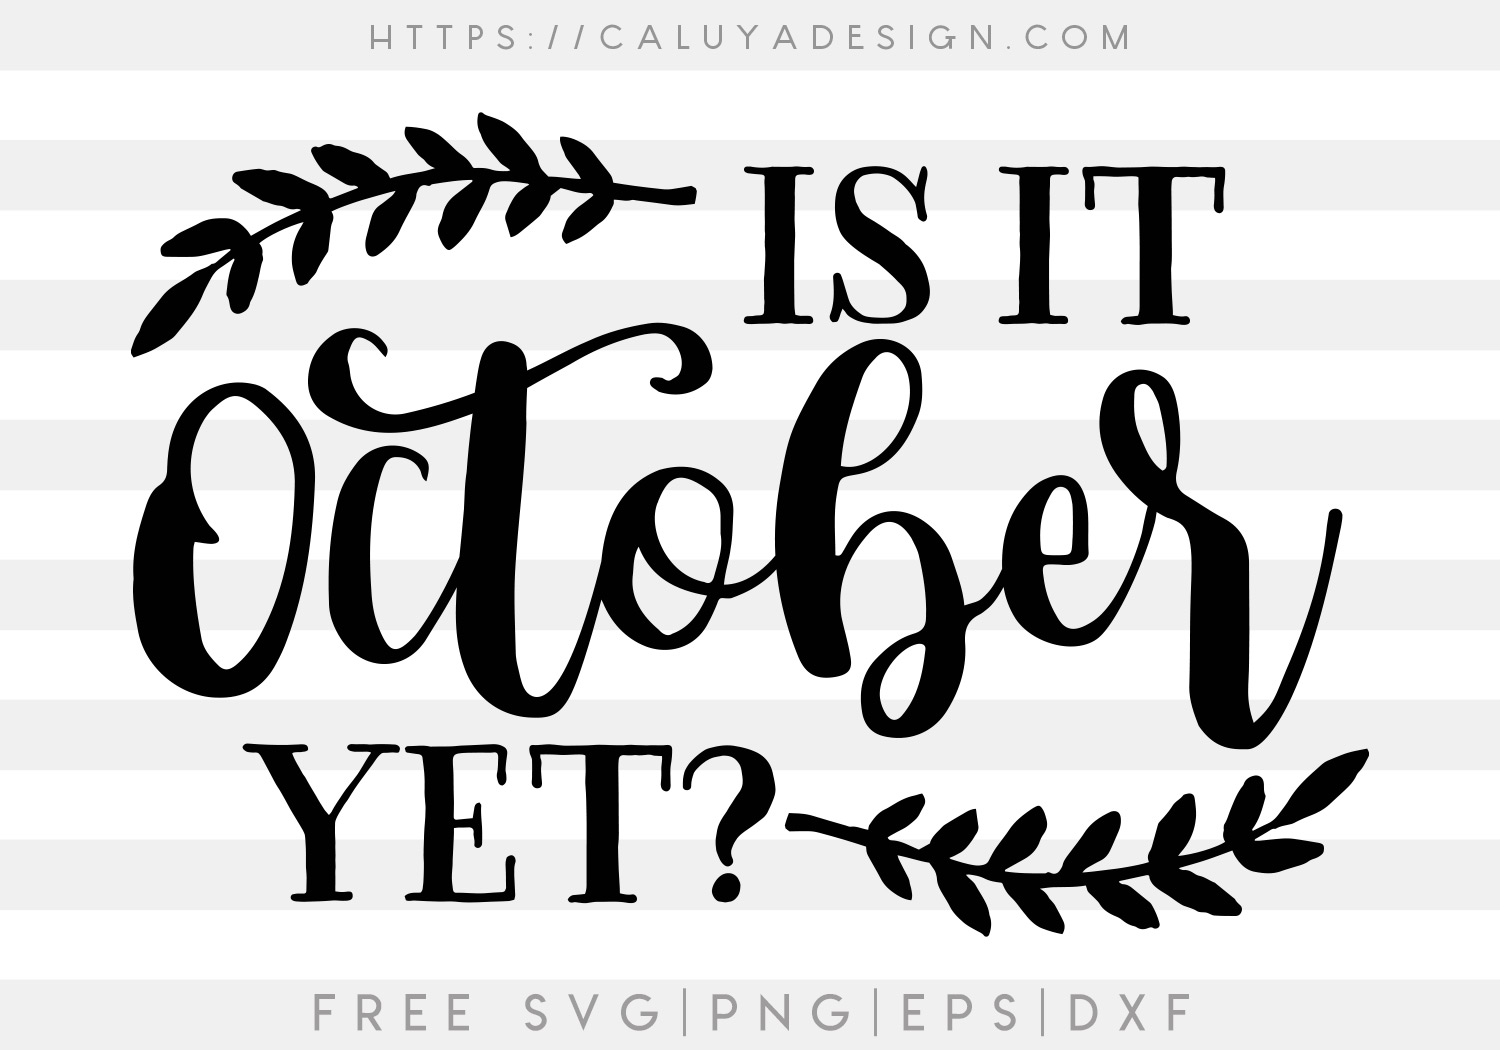 Is It October Yet SVG, PNG, EPS & DXF